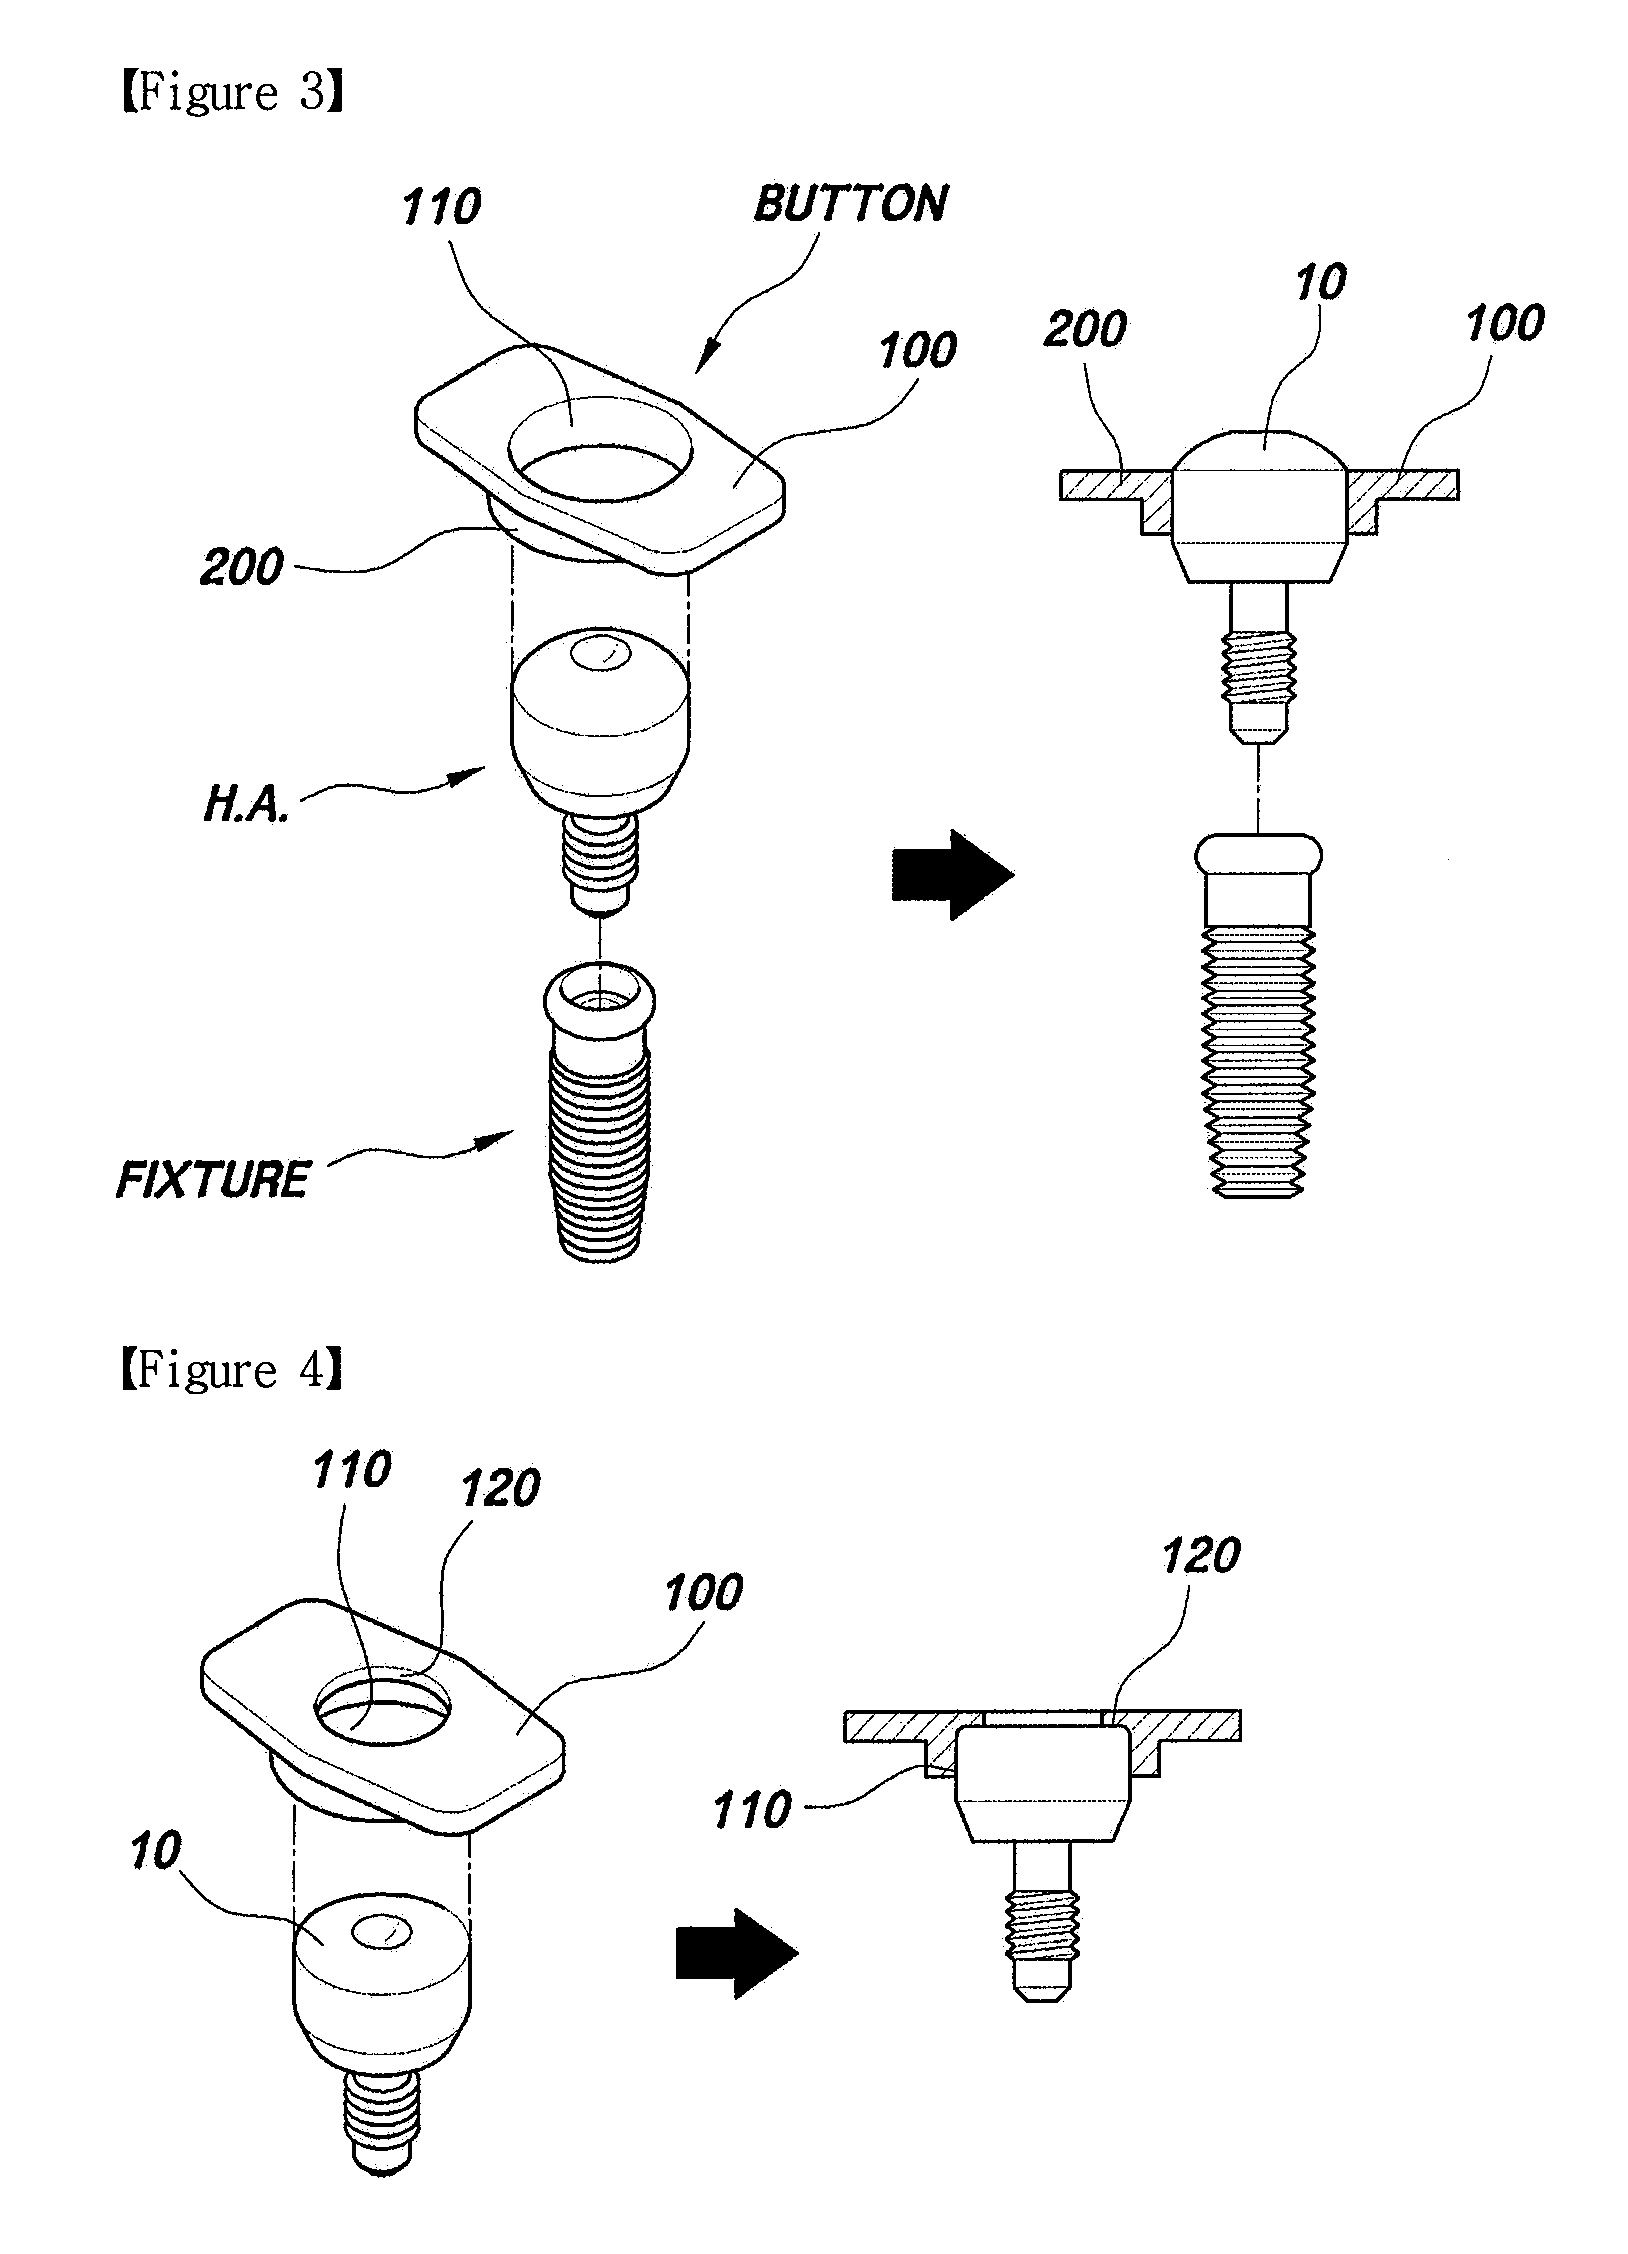 Button for implant healing abutment and implant healing abutment having pressing part